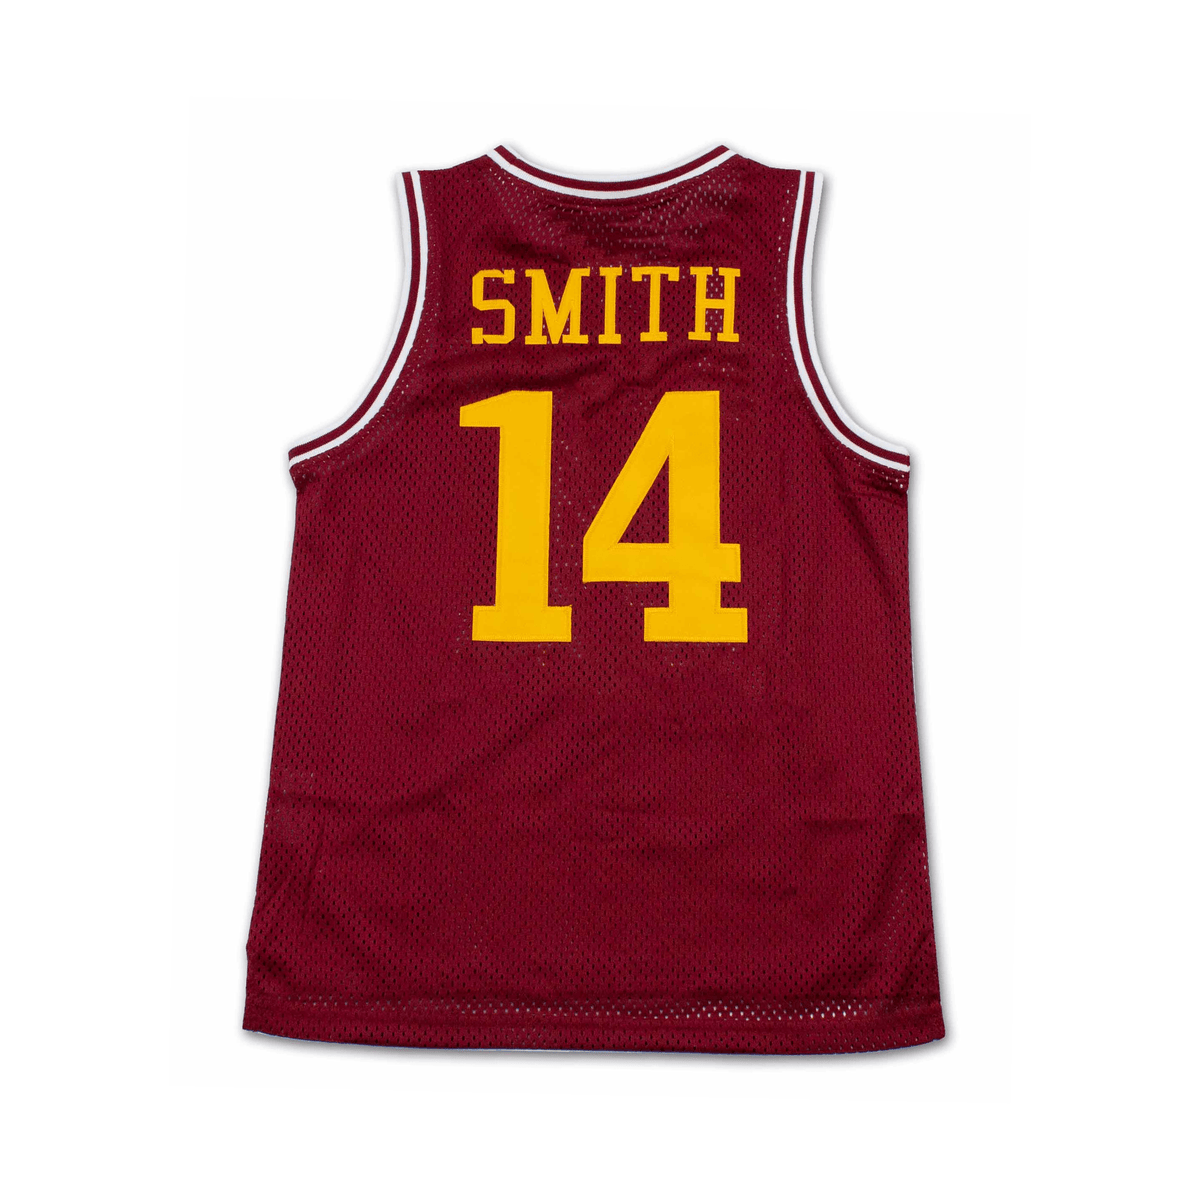 Bel-Air Academy Smith Jersey